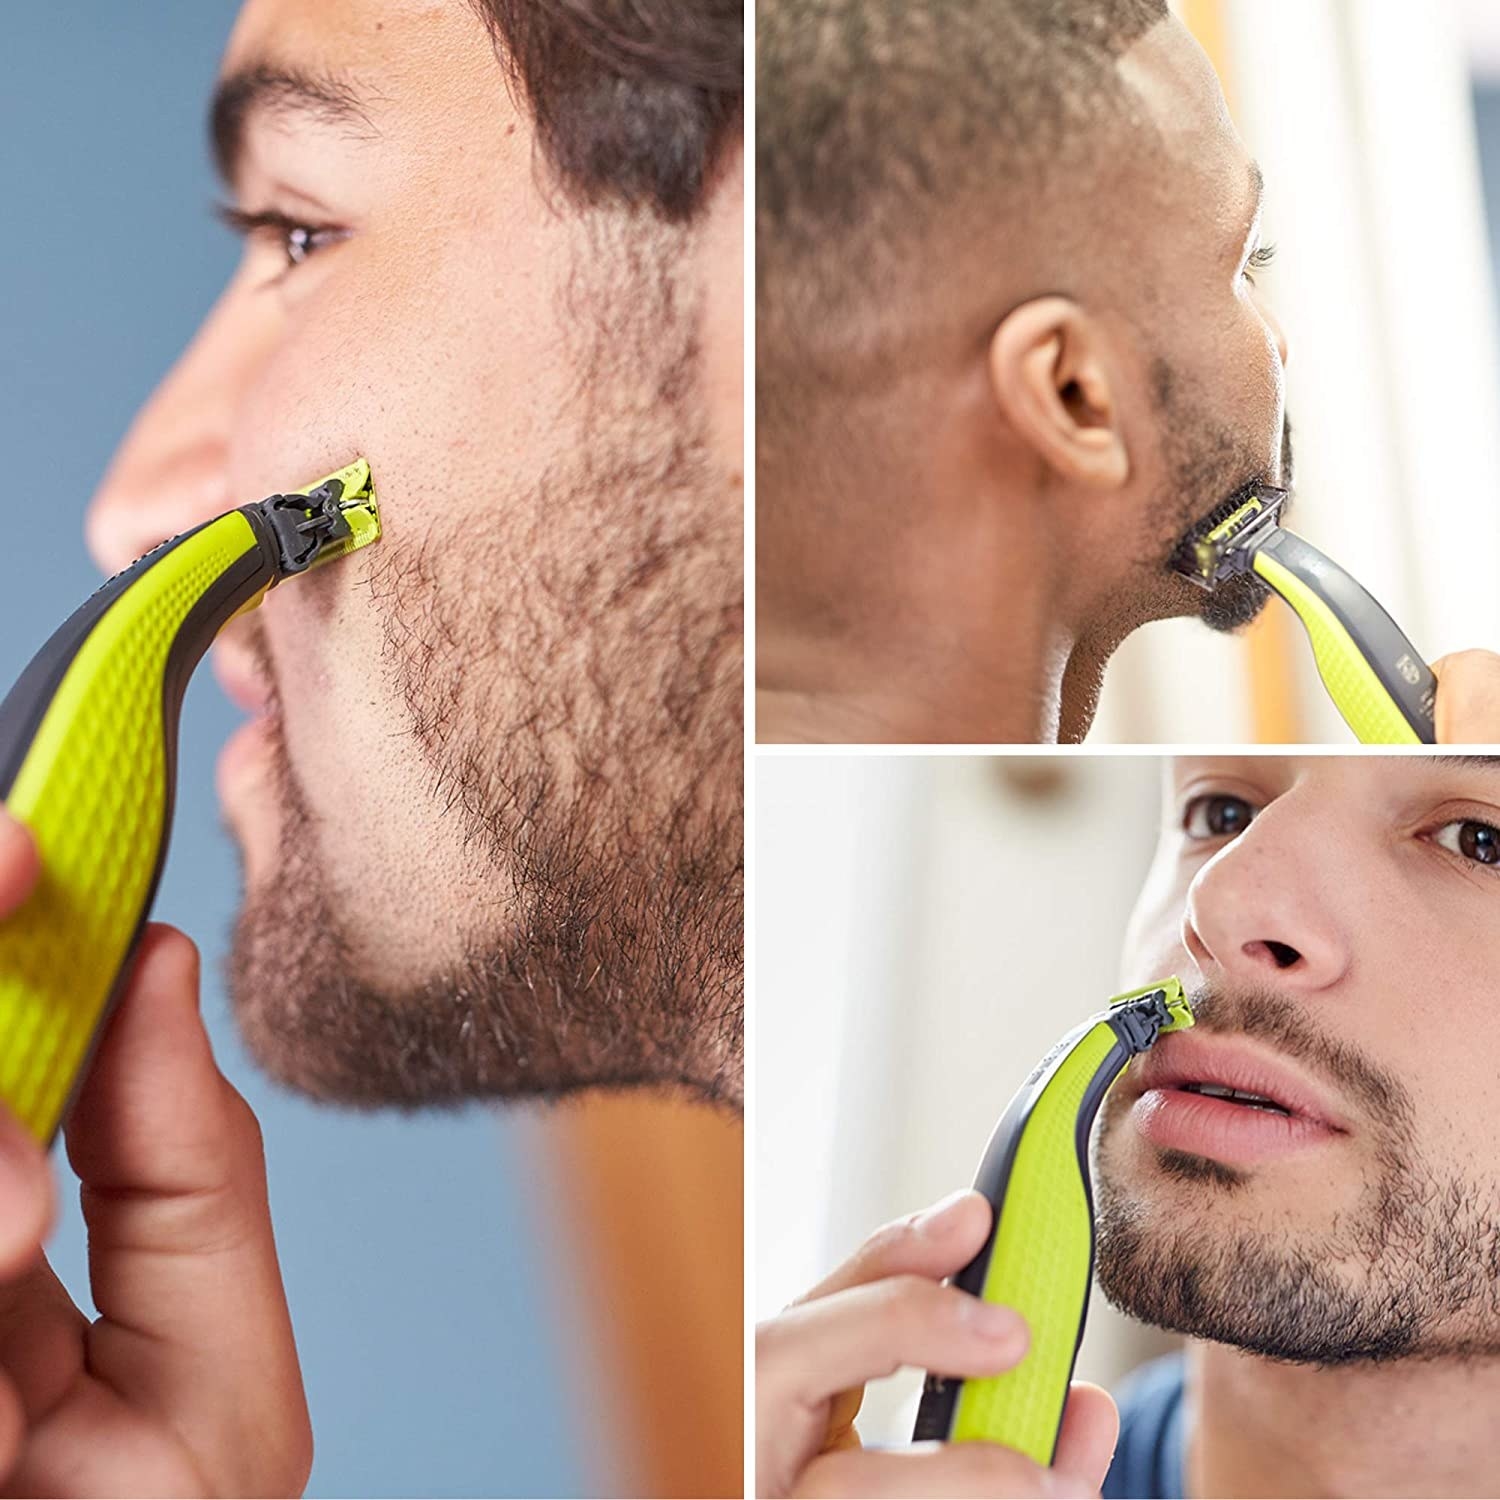 three people using the shaver on their face in different frames